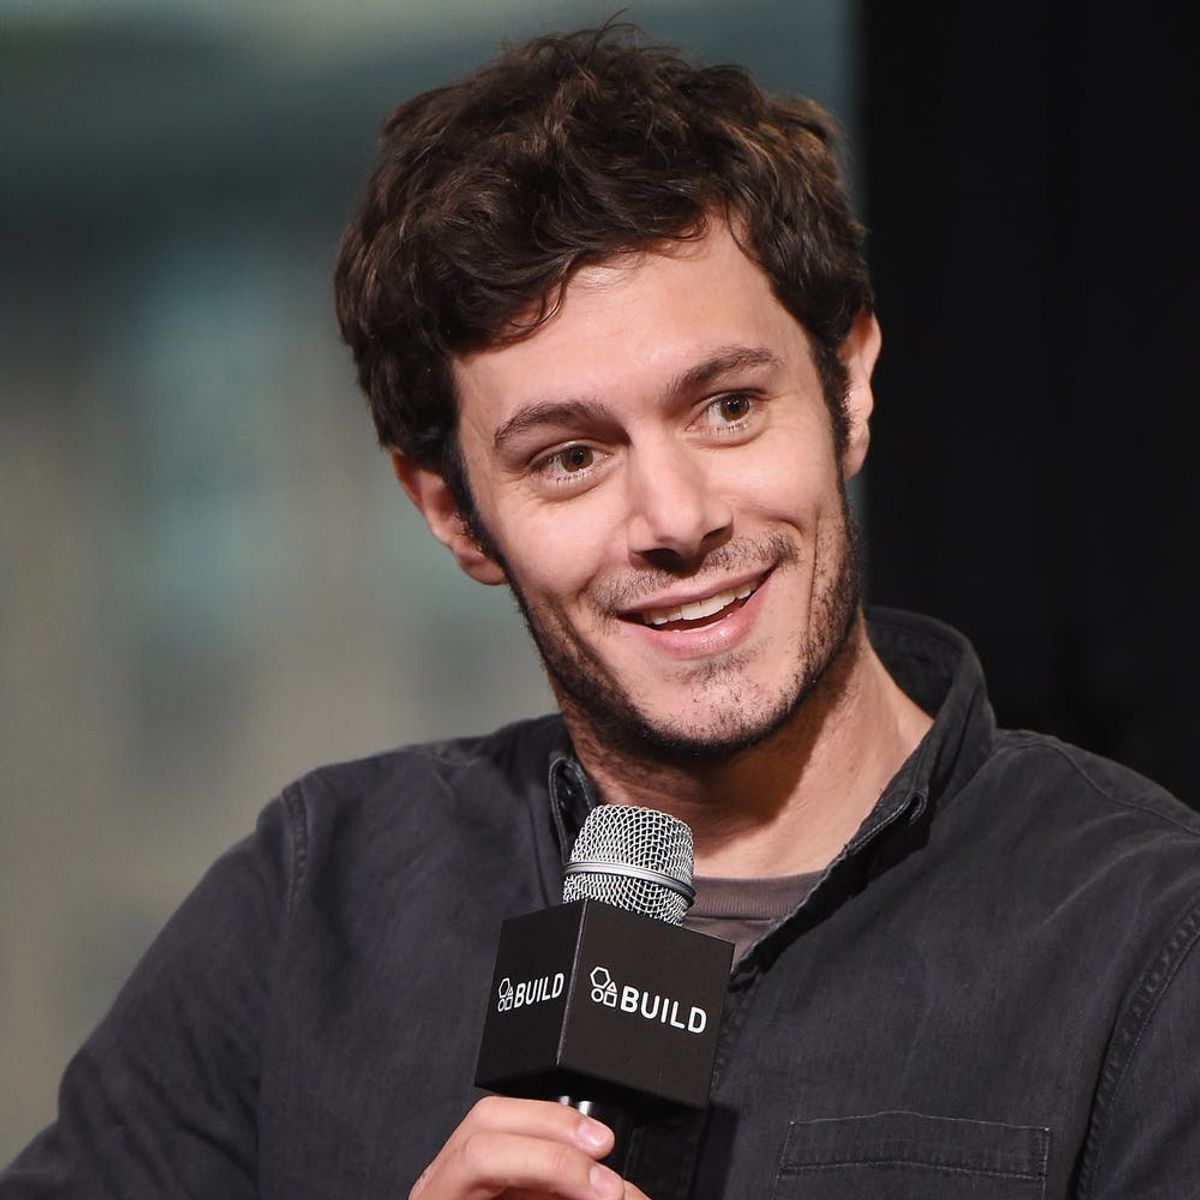 Adam Brody Auditioned for “Dawson’s Creek” and “Blue’s Clues” Before “The O.C.”